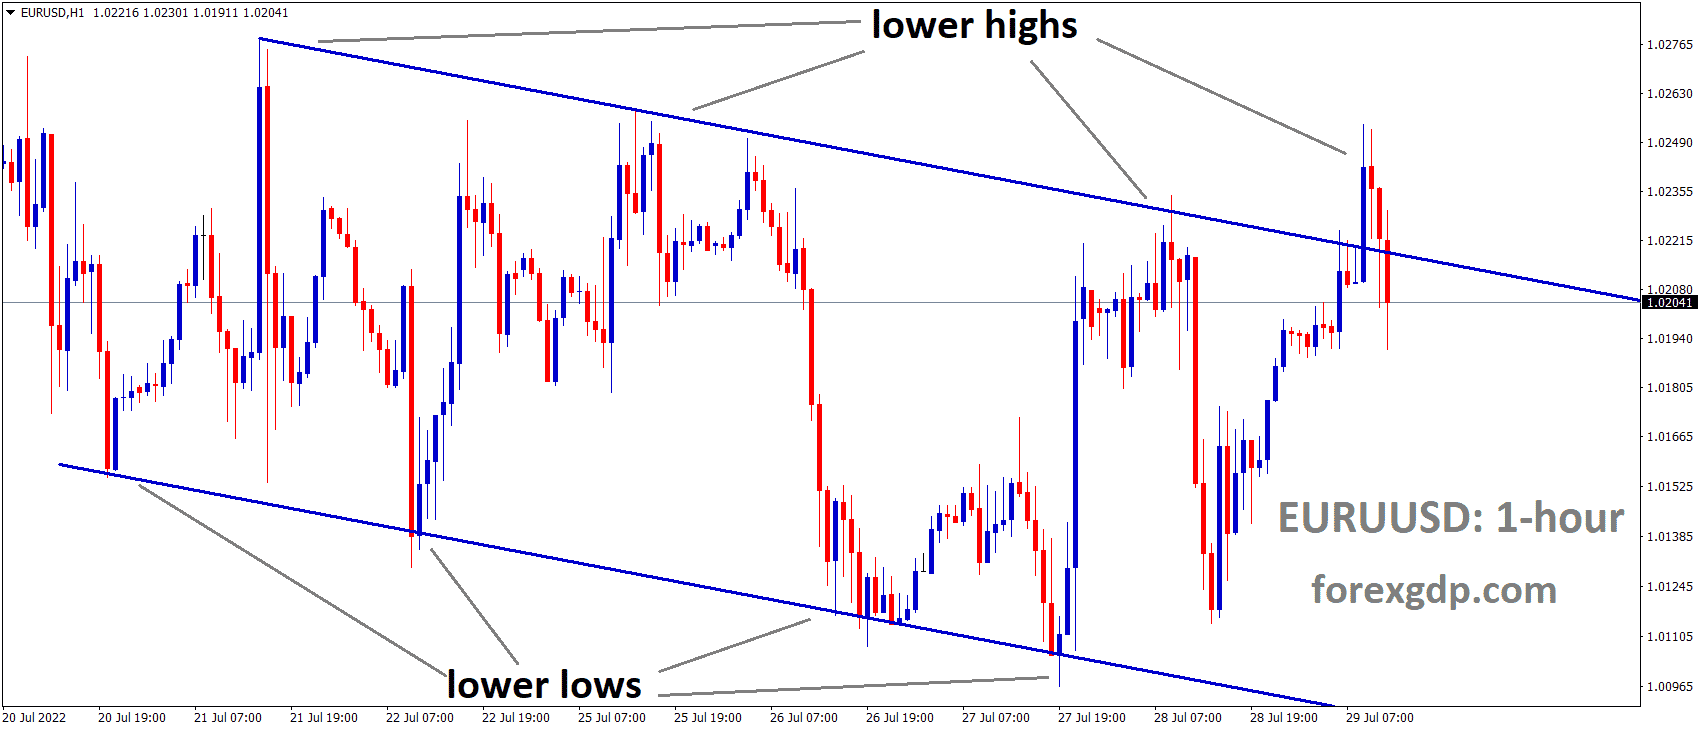 EURUSD is moving in the Descending channel and the market has fallen from the Lower high area of the channel